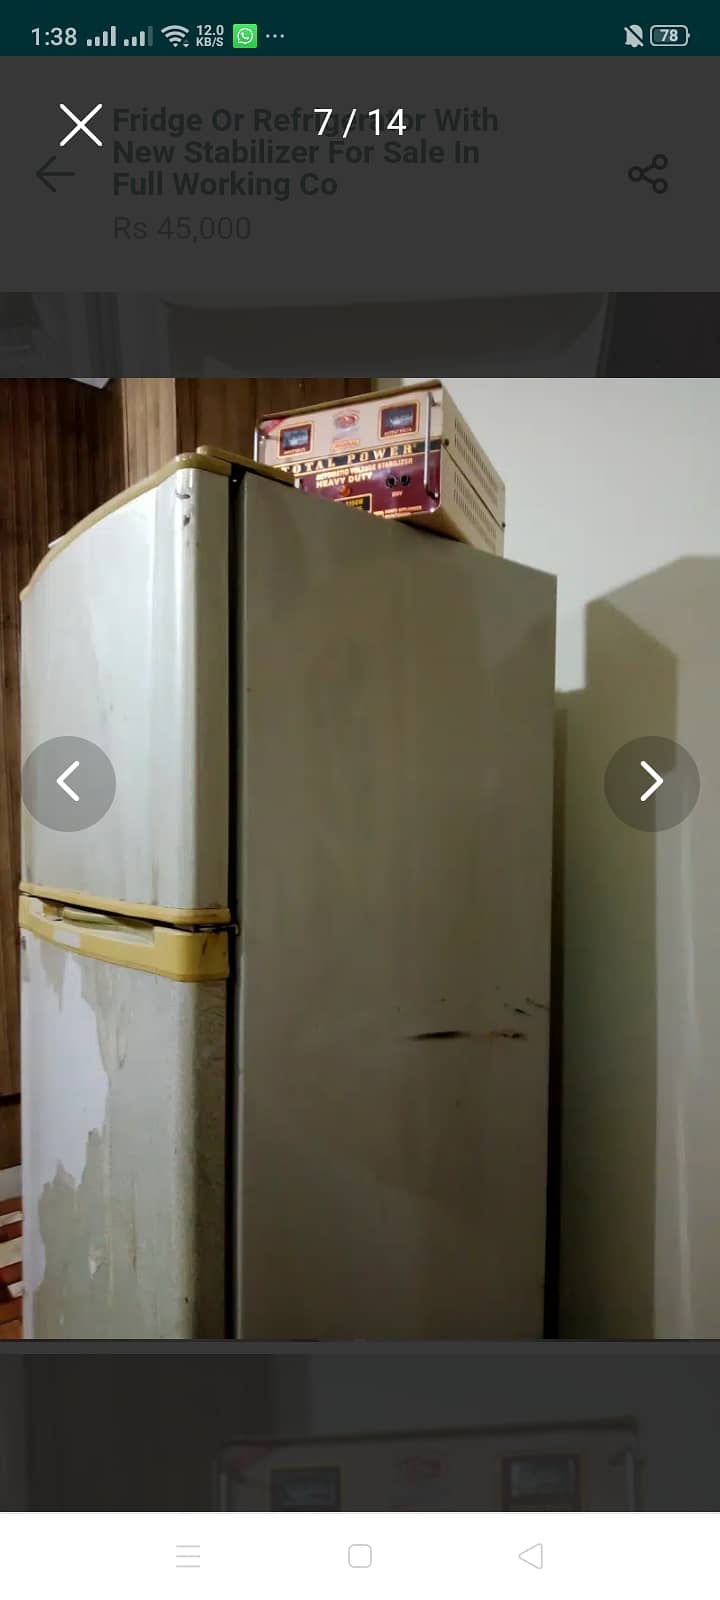 Dawlance refrigerator /fridge for in very good condition. 6